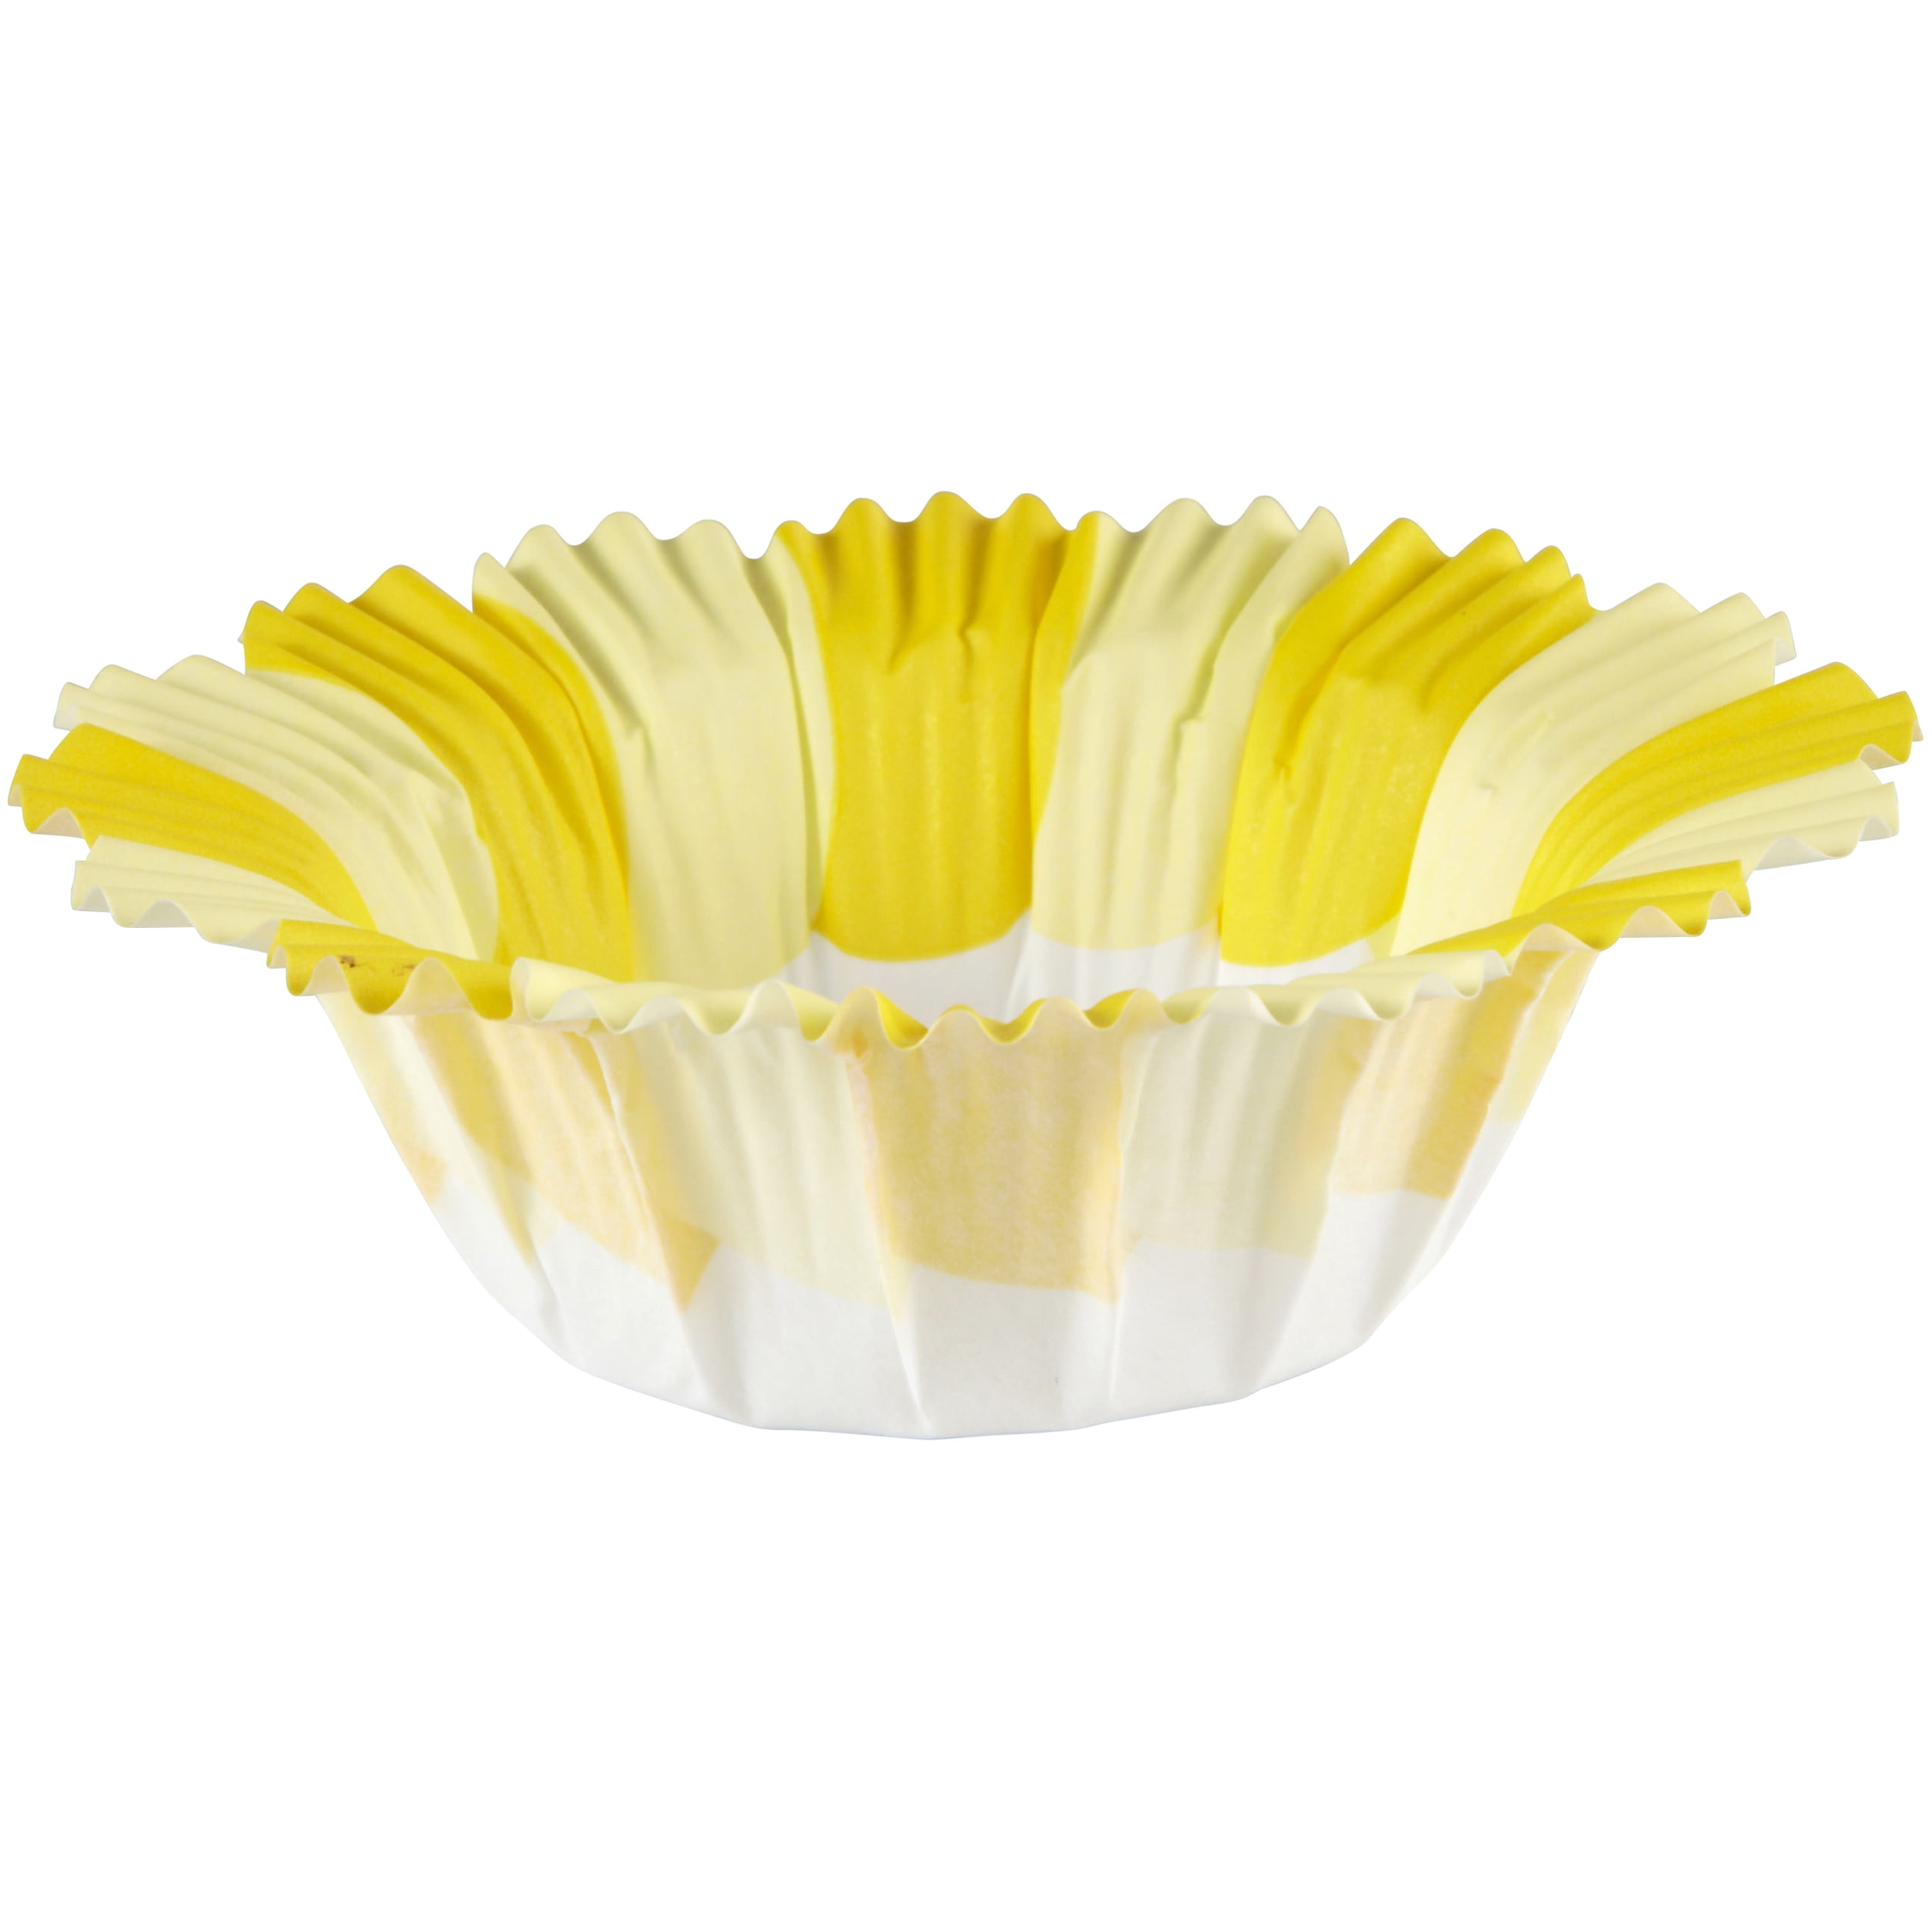 Wilton Yellow Blossom Baking Cups, 12-Count 